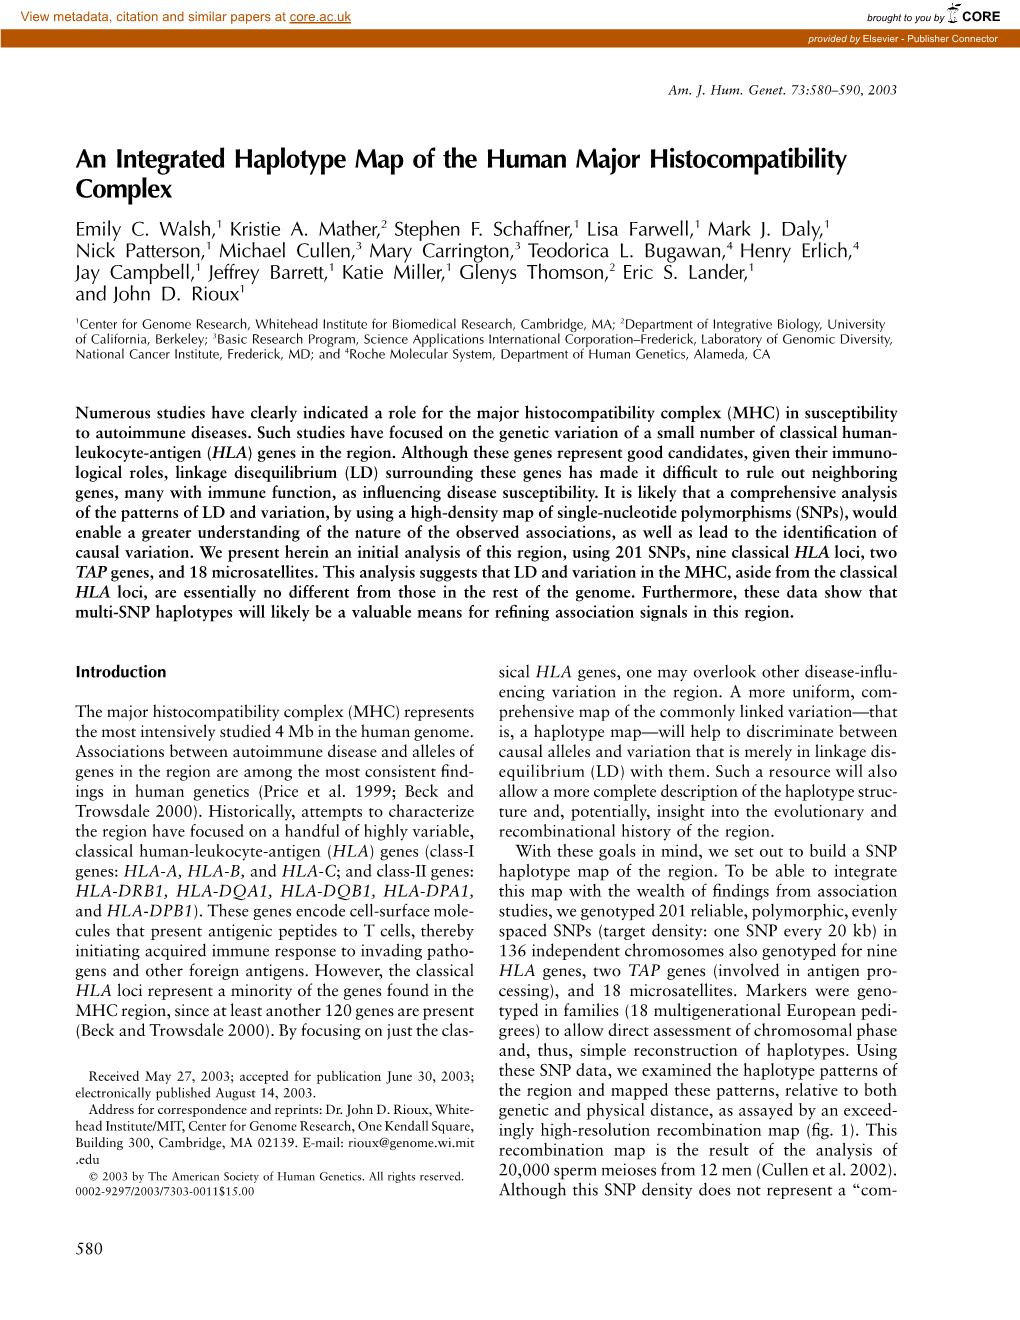 An Integrated Haplotype Map of the Human Major Histocompatibility Complex Emily C